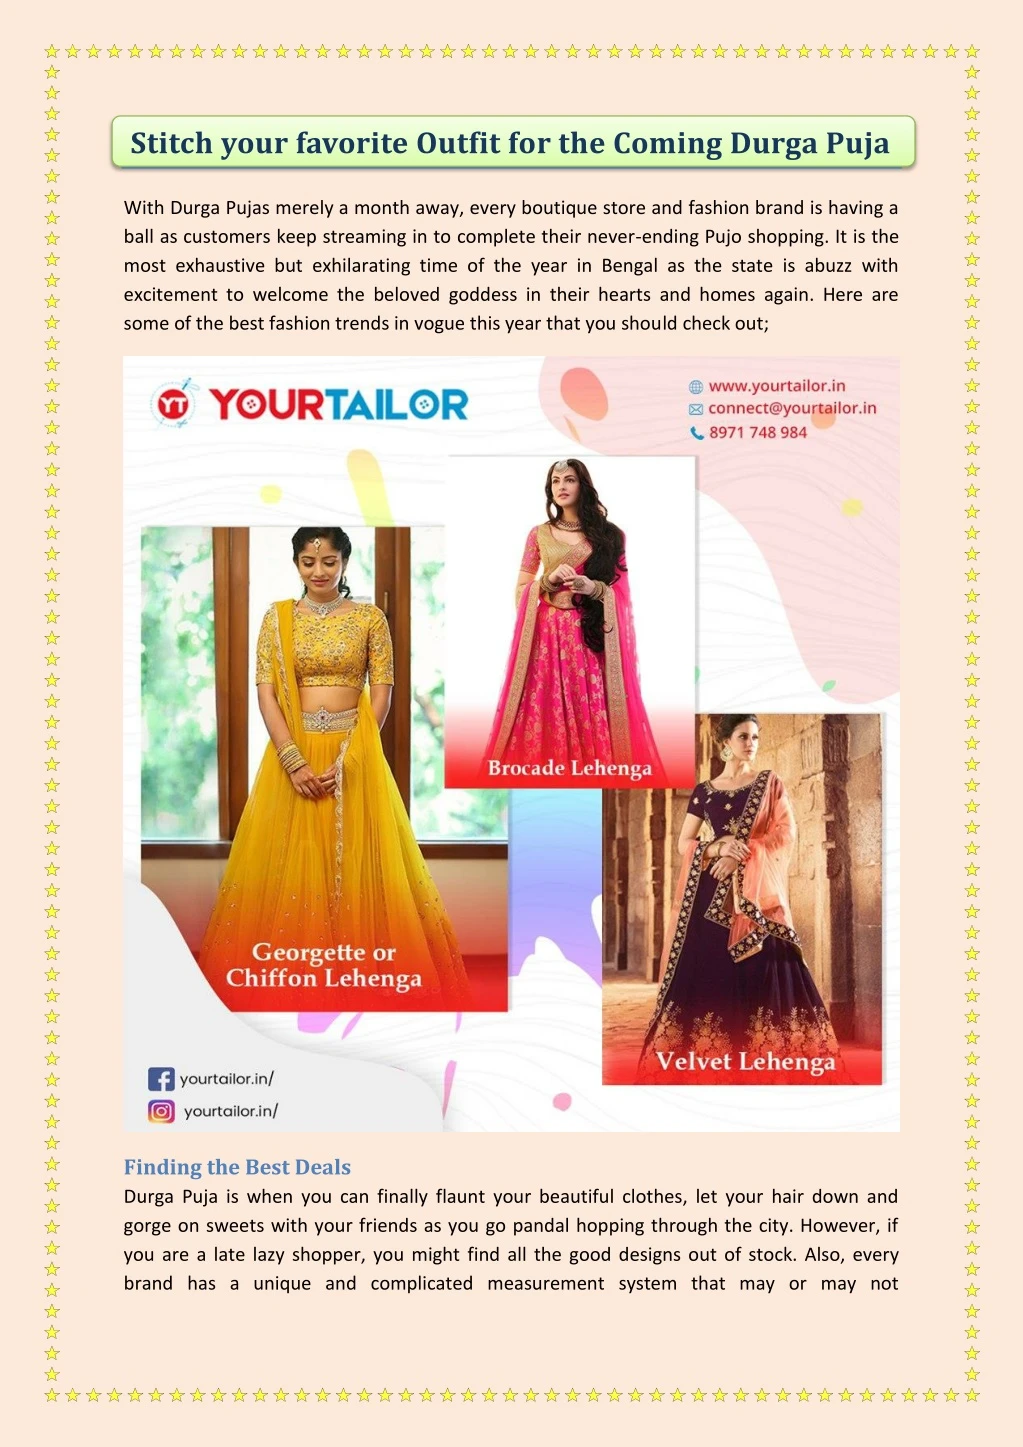 stitch your favorite outfit for the coming durga